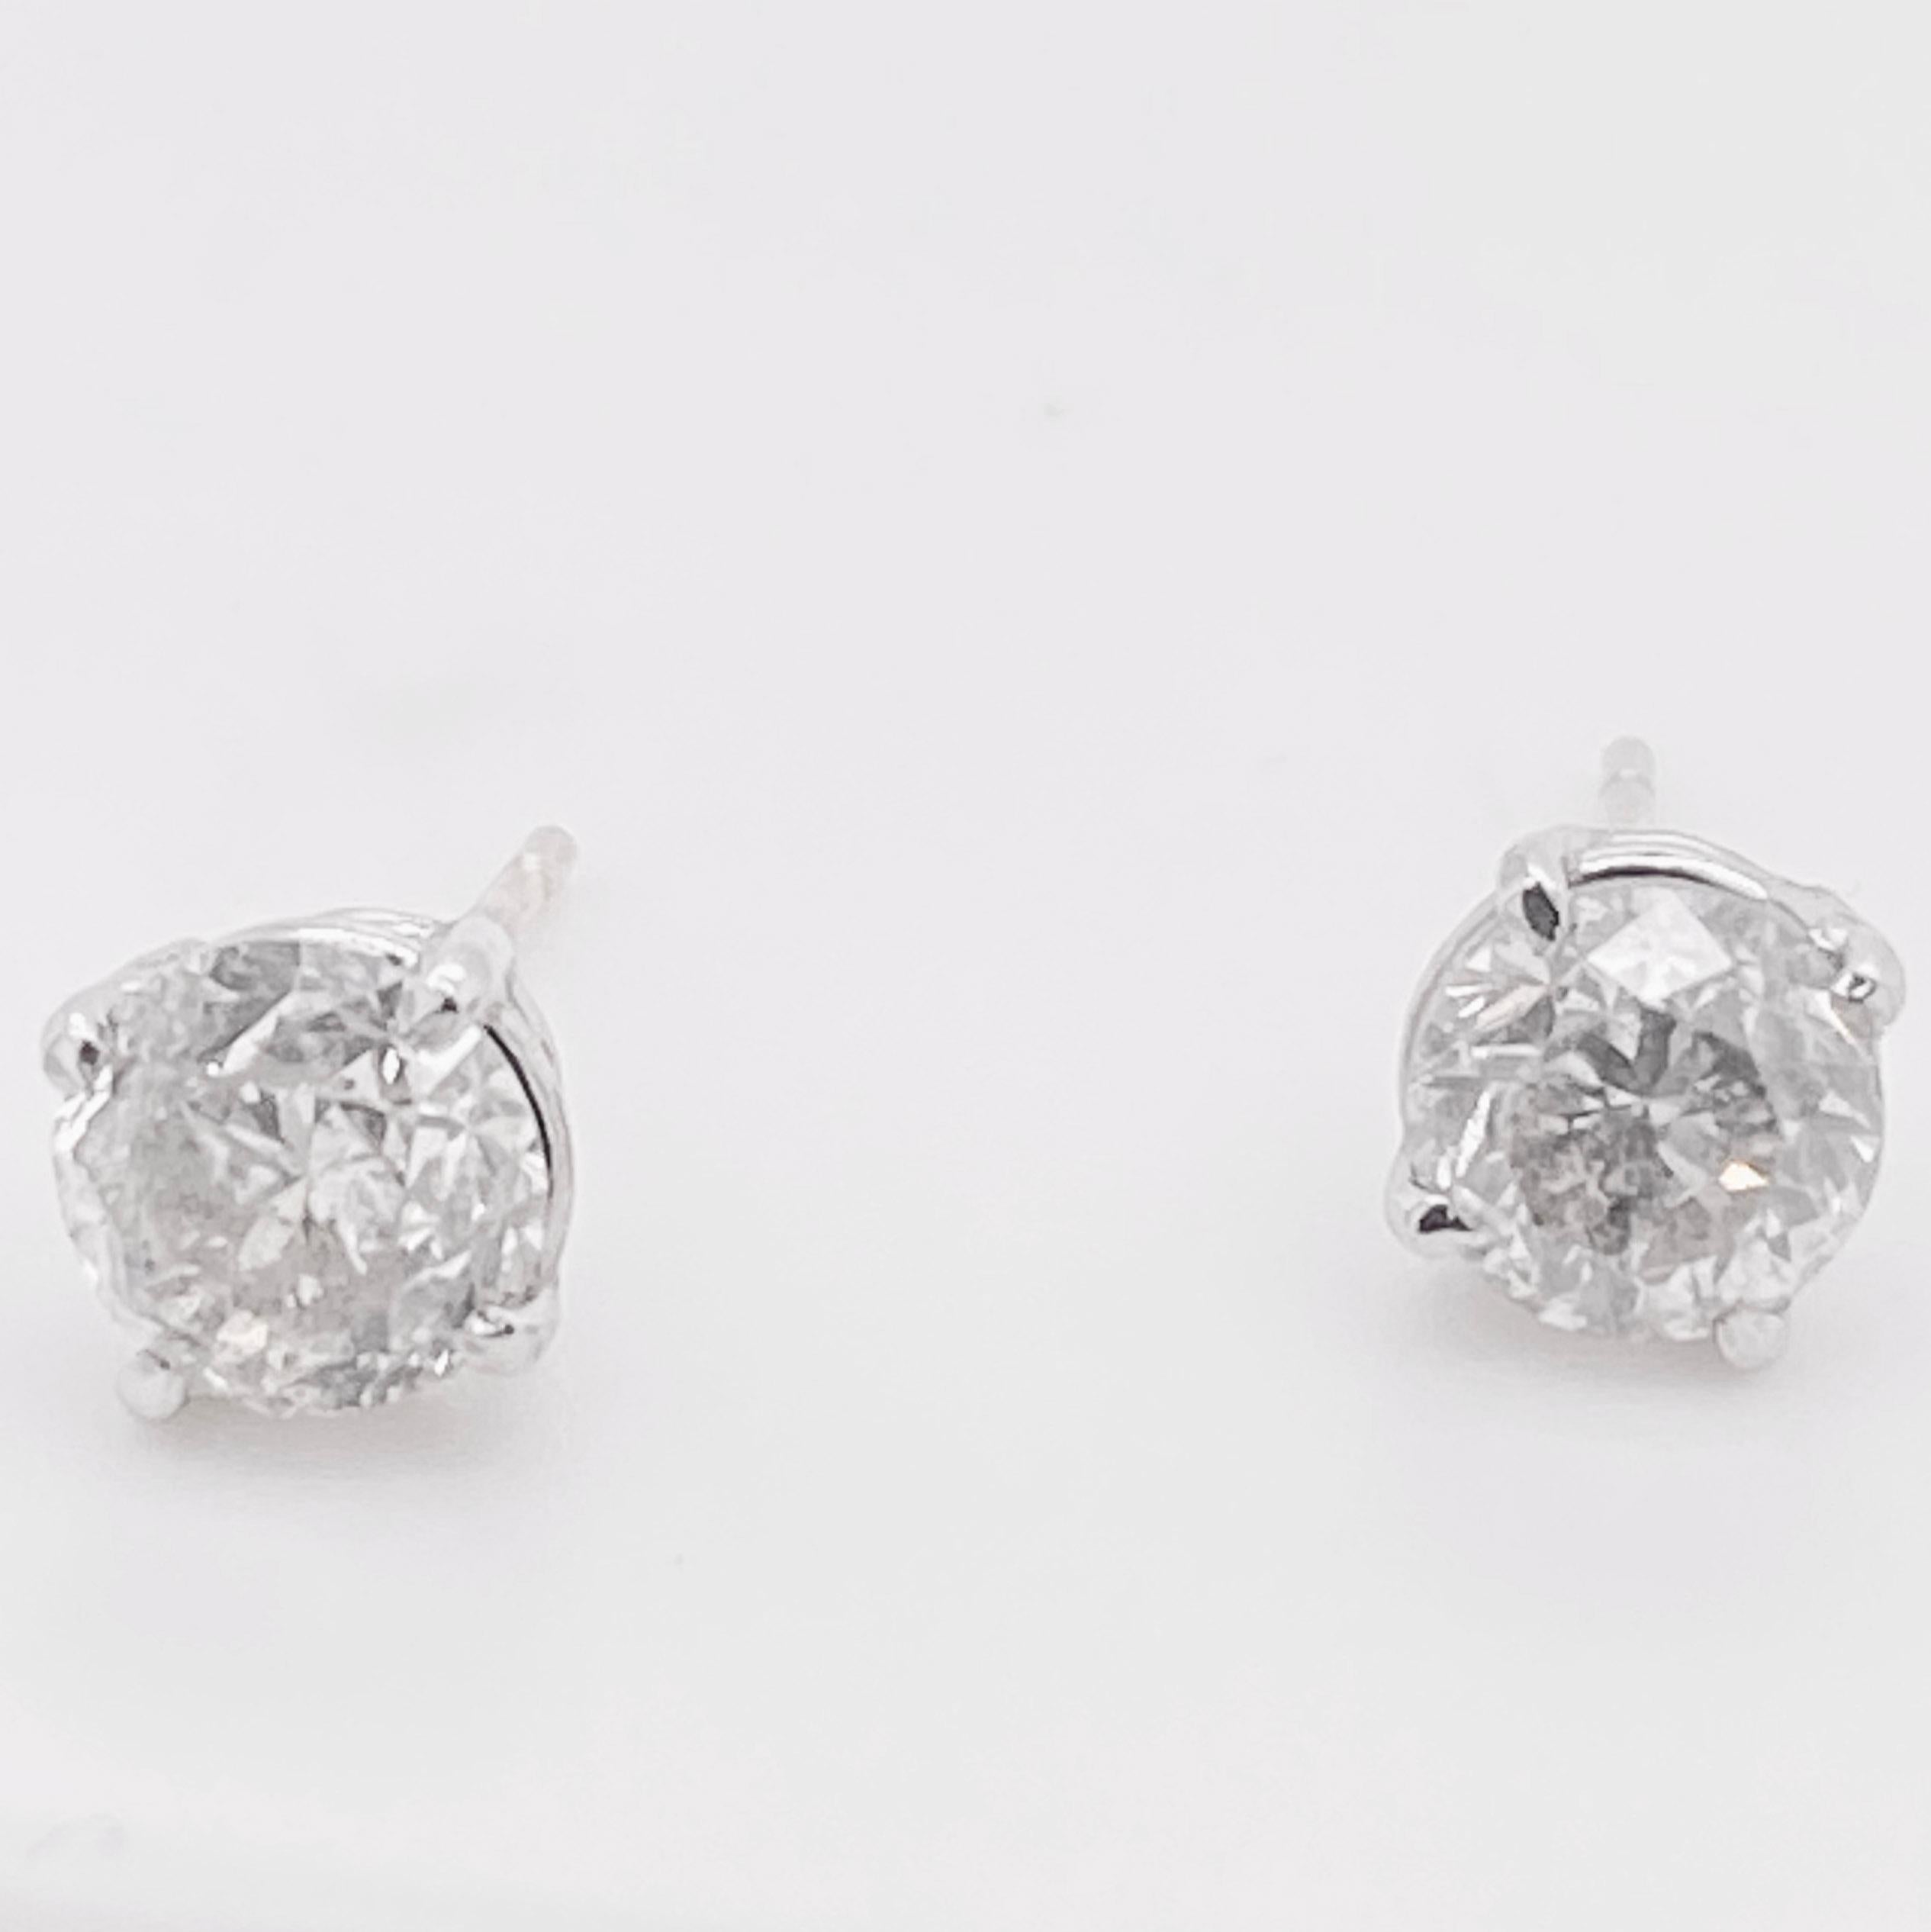 Round Cut Diamond Stud Earrings, 18 Karat White Gold Round Studs, White Color, VG Clarity For Sale